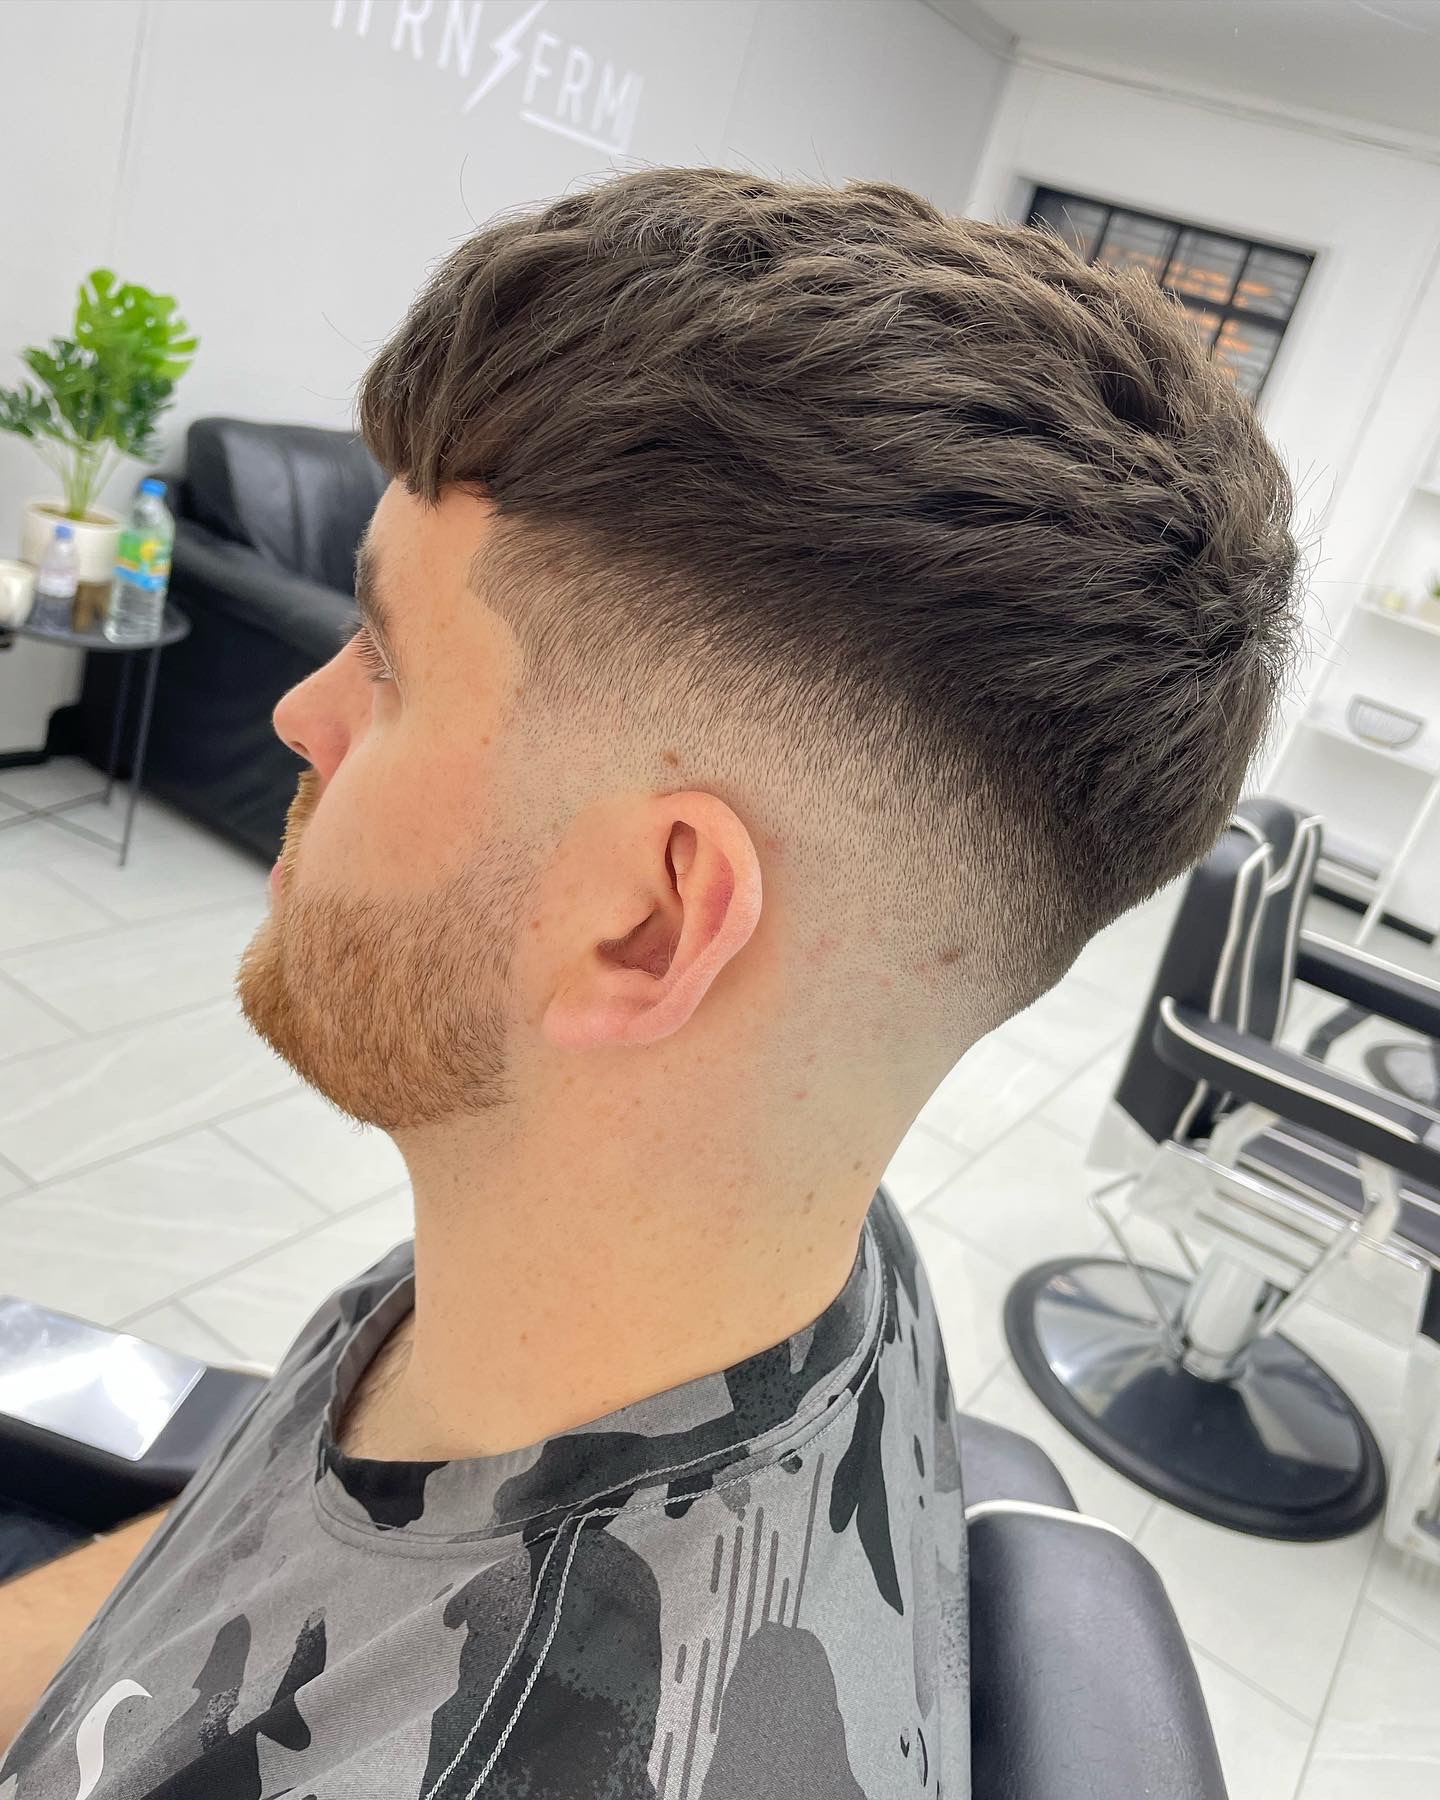 Skin fade with textured top, done by Jev.